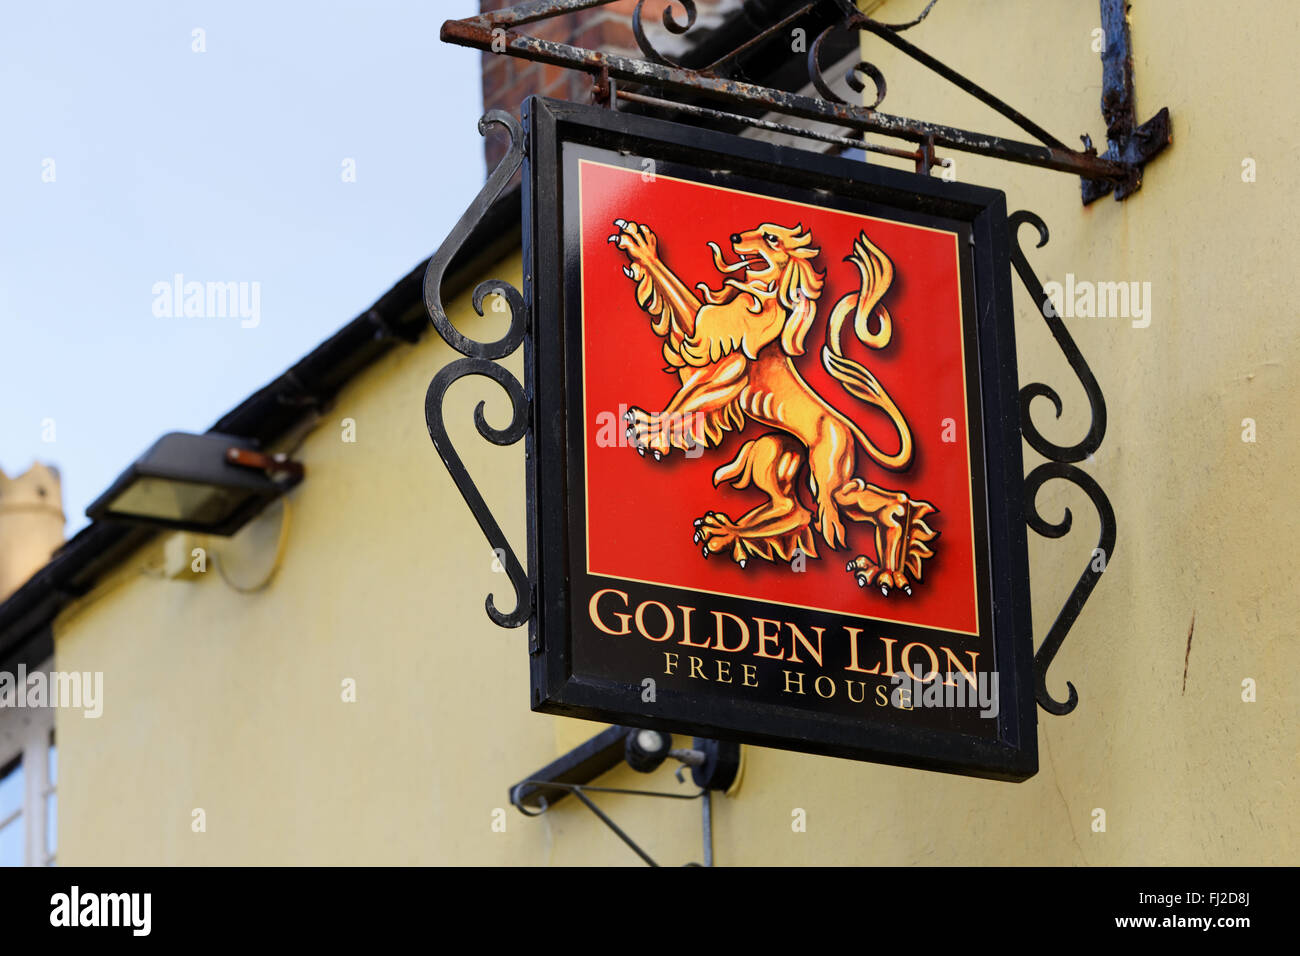 Golden Lion, free house in Padstow, Cornwall, UK. Stock Photo